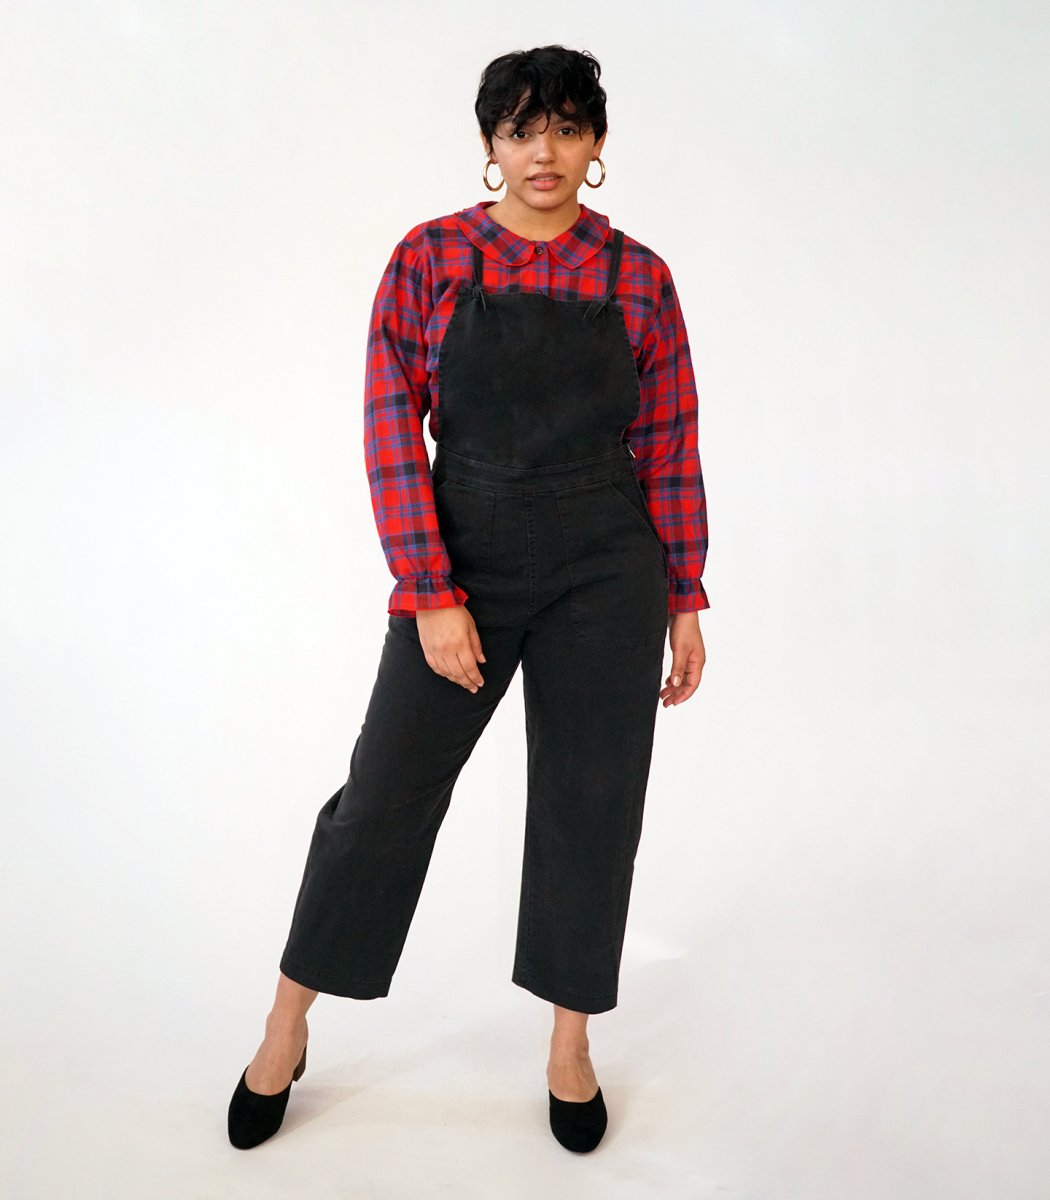 Model wears cropped black overalls with thin adjustable straps and two front pockets over a bright red plaid button up shirt. The Knot Overalls in Black are designed by Loup and Made in New York City, NY.